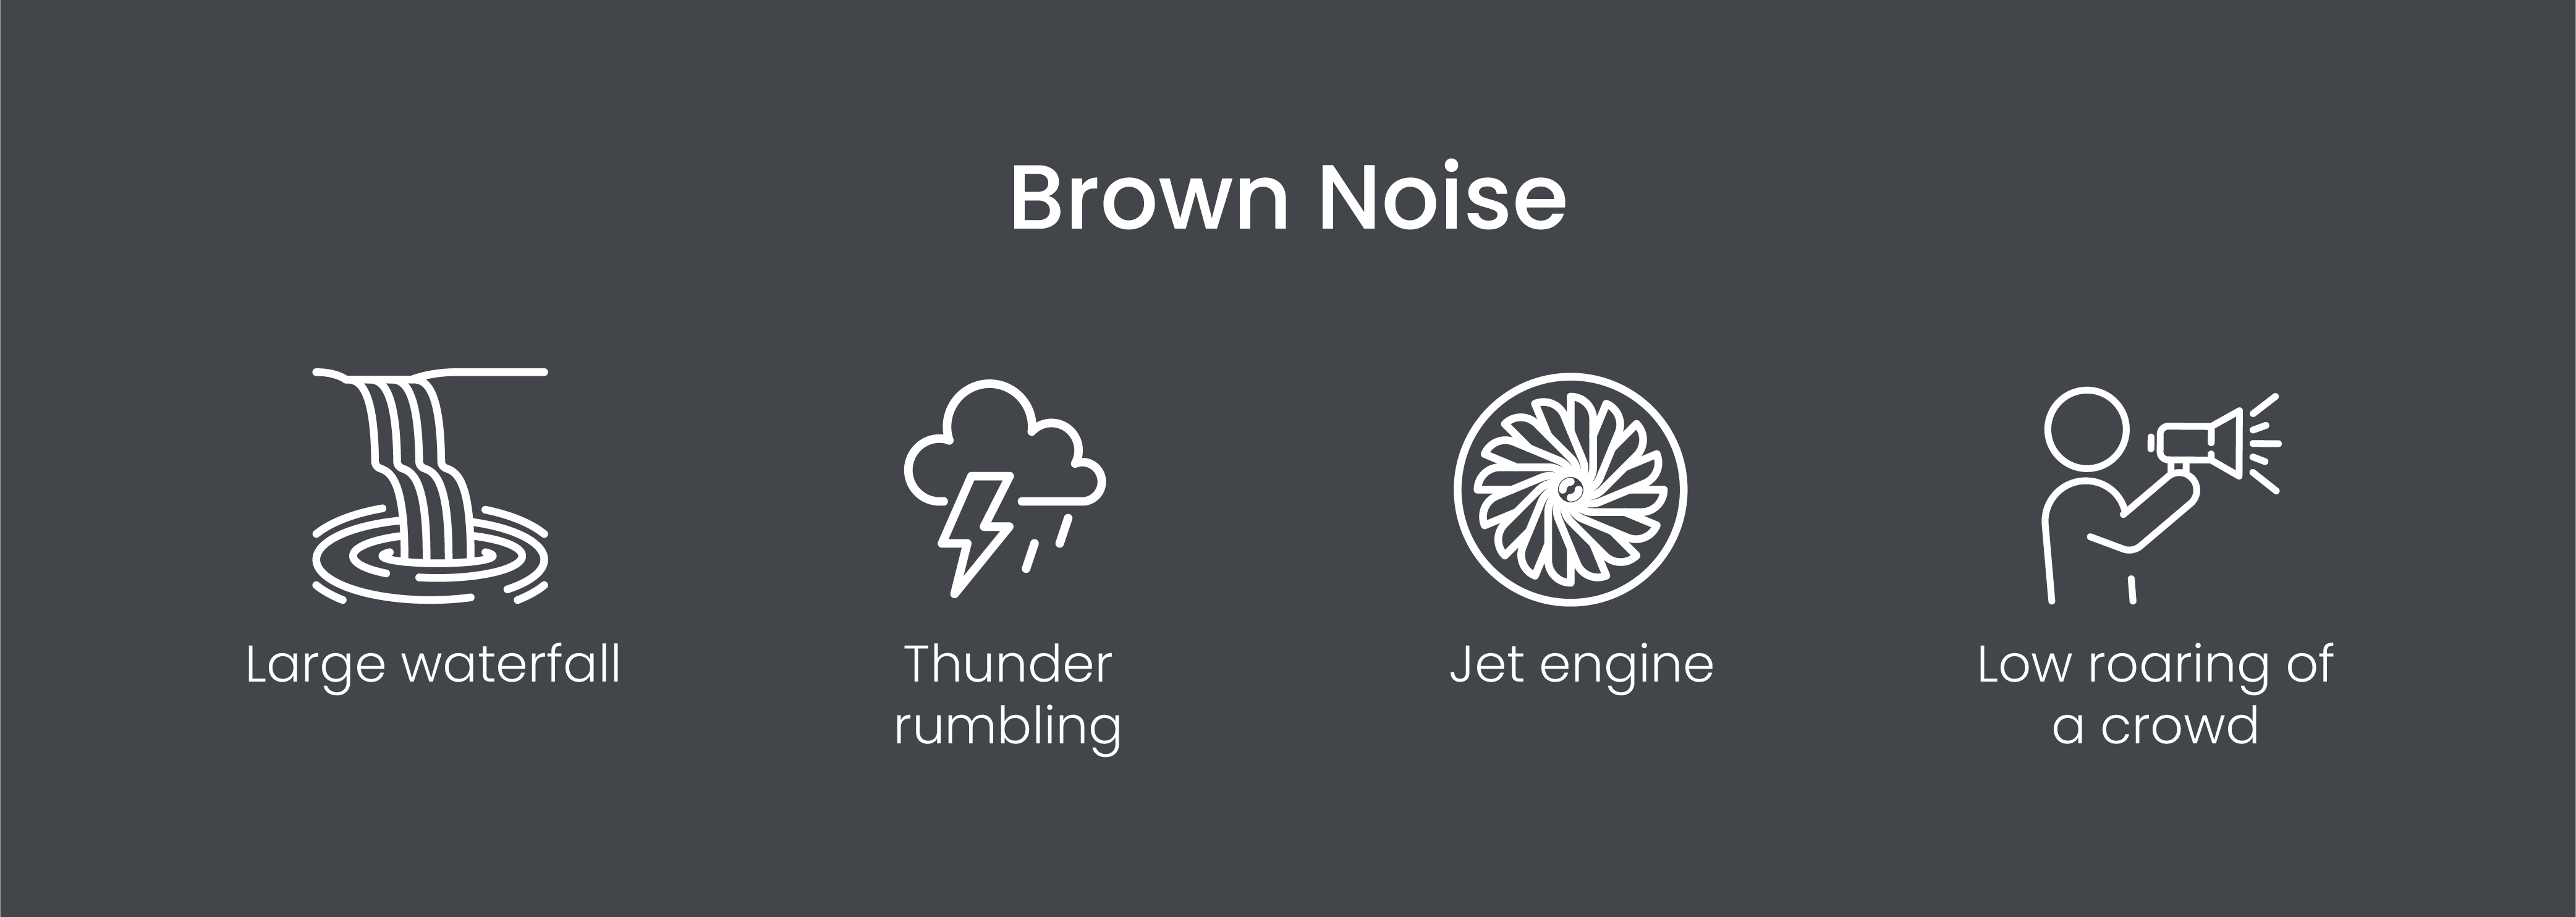 Examples of brown noise